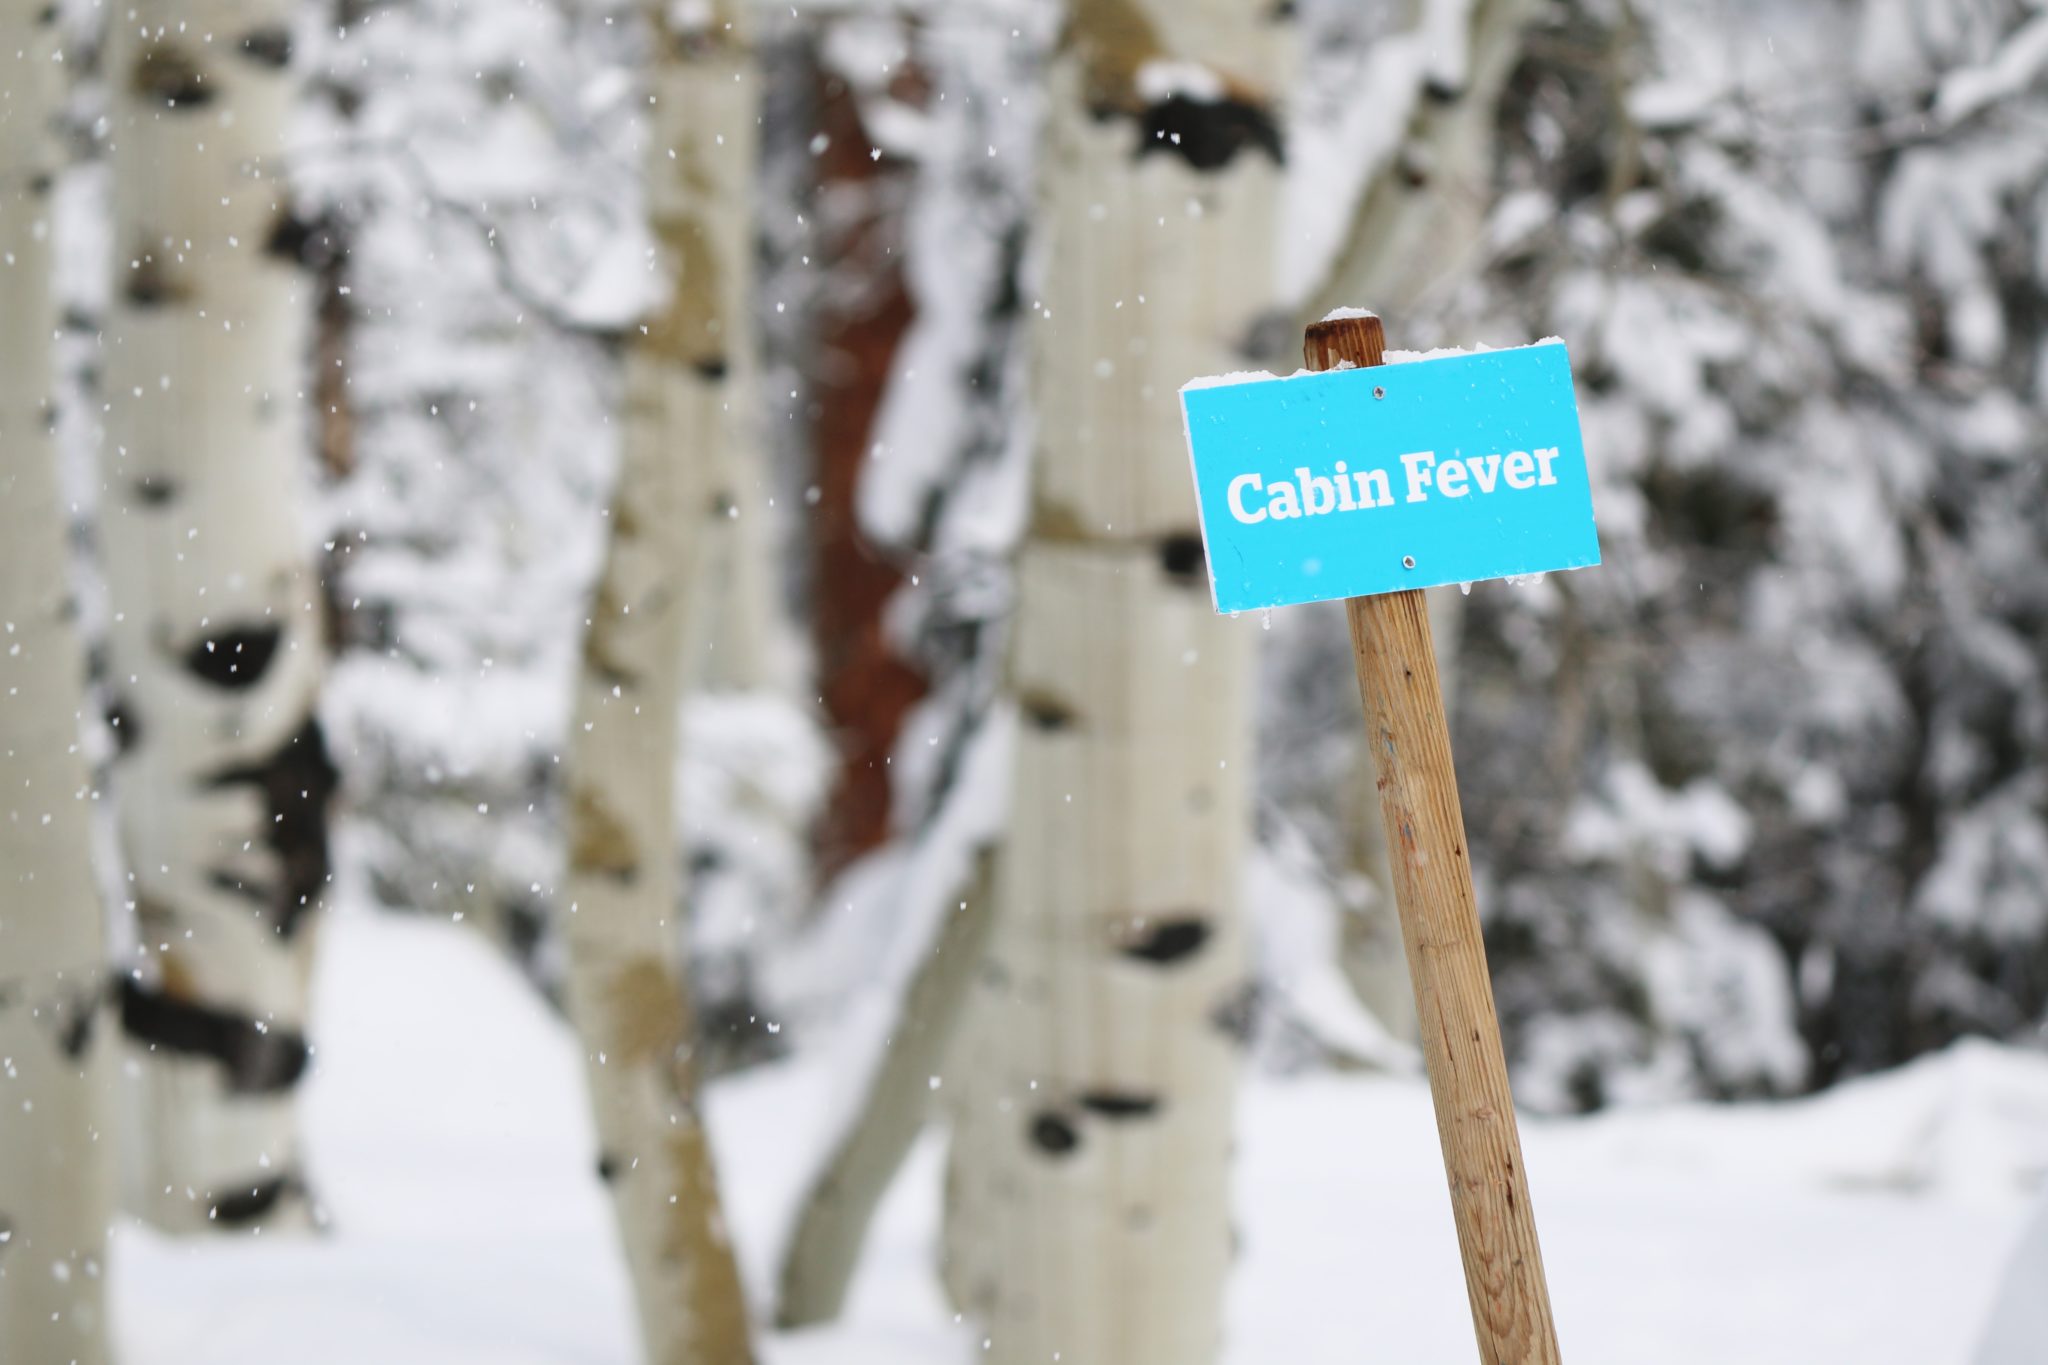 White tree trunks in the snow with a blue sign says Cabin Fever.